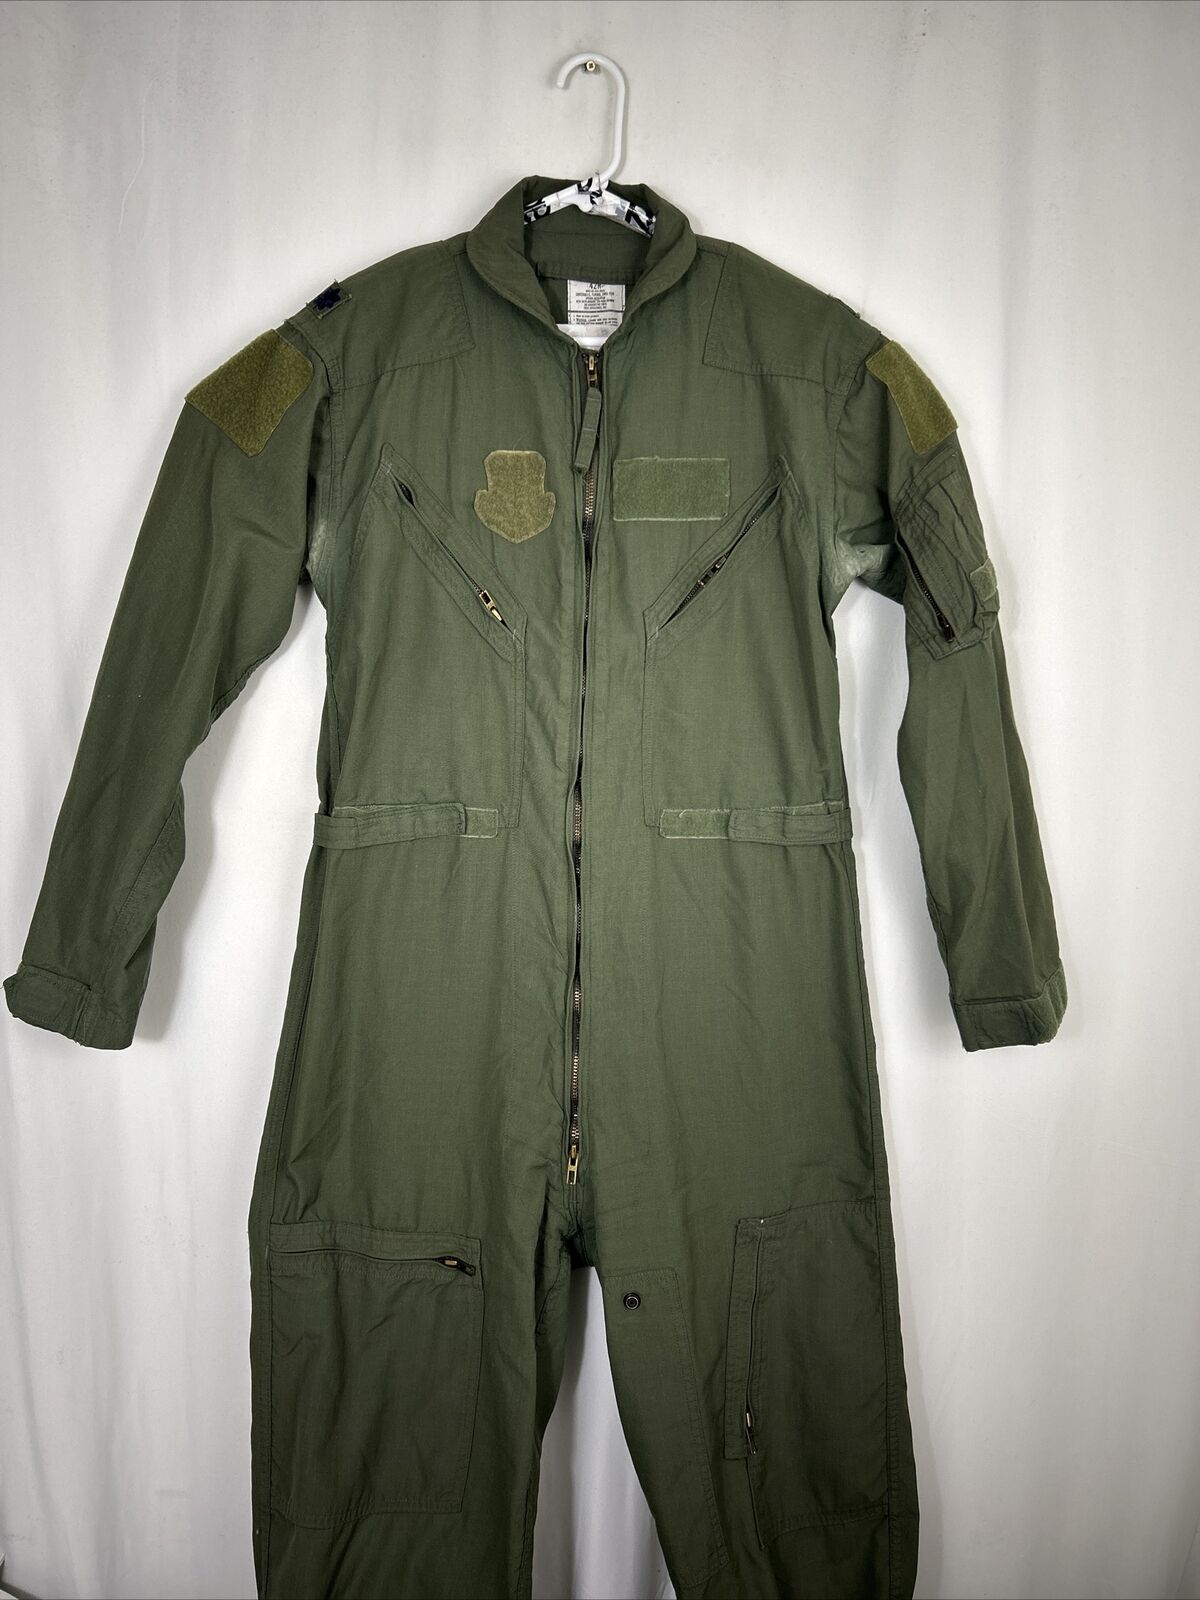 USAF Military Flyers Coveralls Flight Suit CWU- 27/P green sz 42R Pit Stains